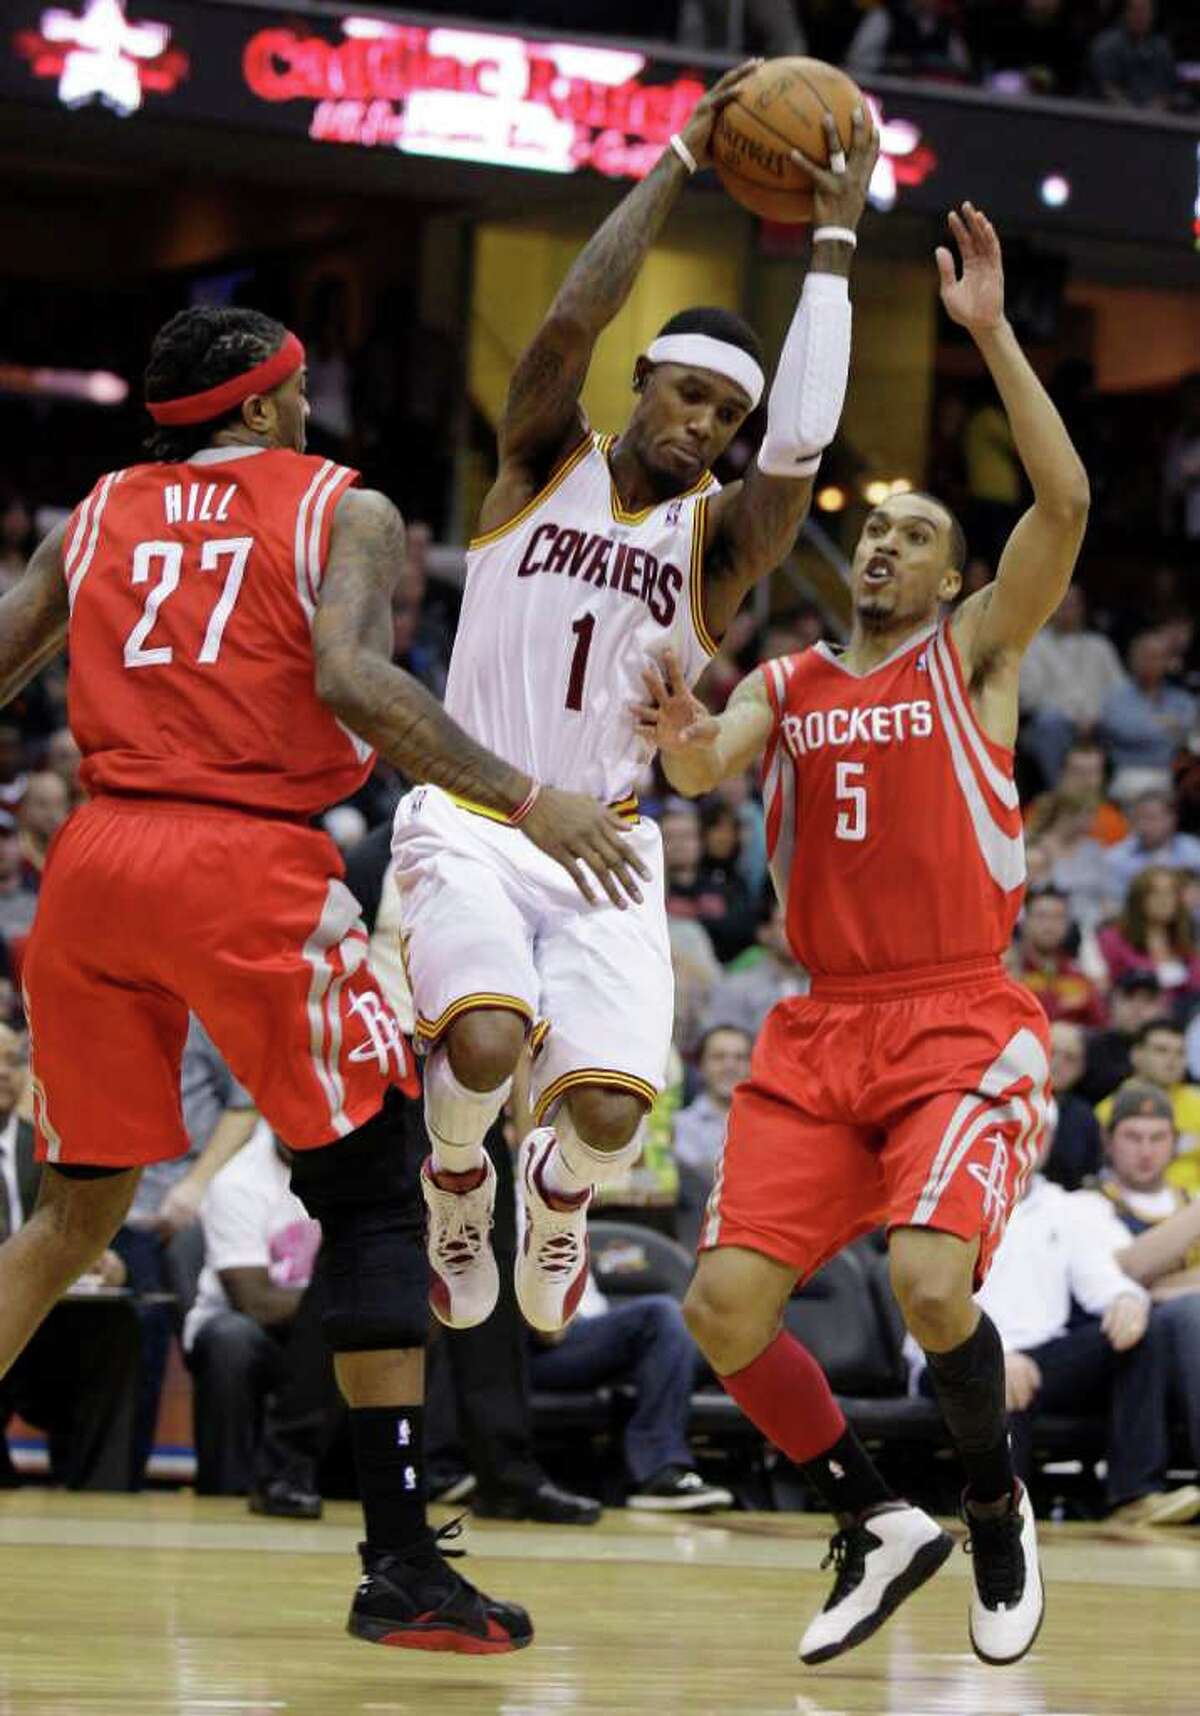 Cleveland Cavaliers' Daniel Gibson (1) jumps between Houston Rockets center Jordan Hill (27) and Courtney Lee (5) in the first quarter in an NBA basketball game Sunday, March 11, 2012, in Cleveland. (AP Photo/Tony Dejak)